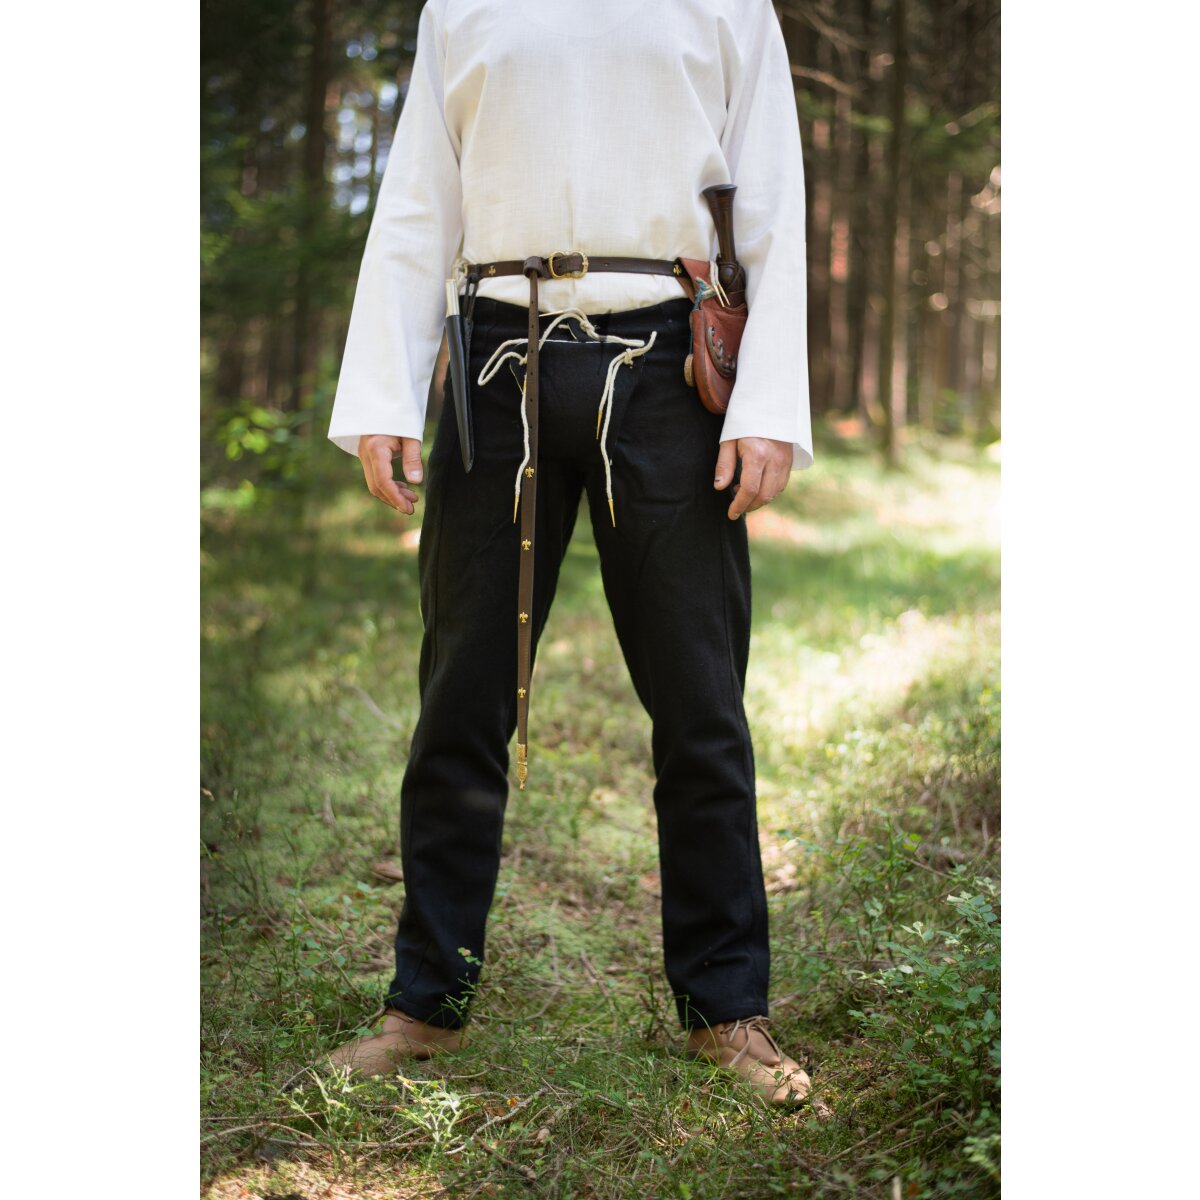 black, Late 64,00 pants 14th-15th century € medieval